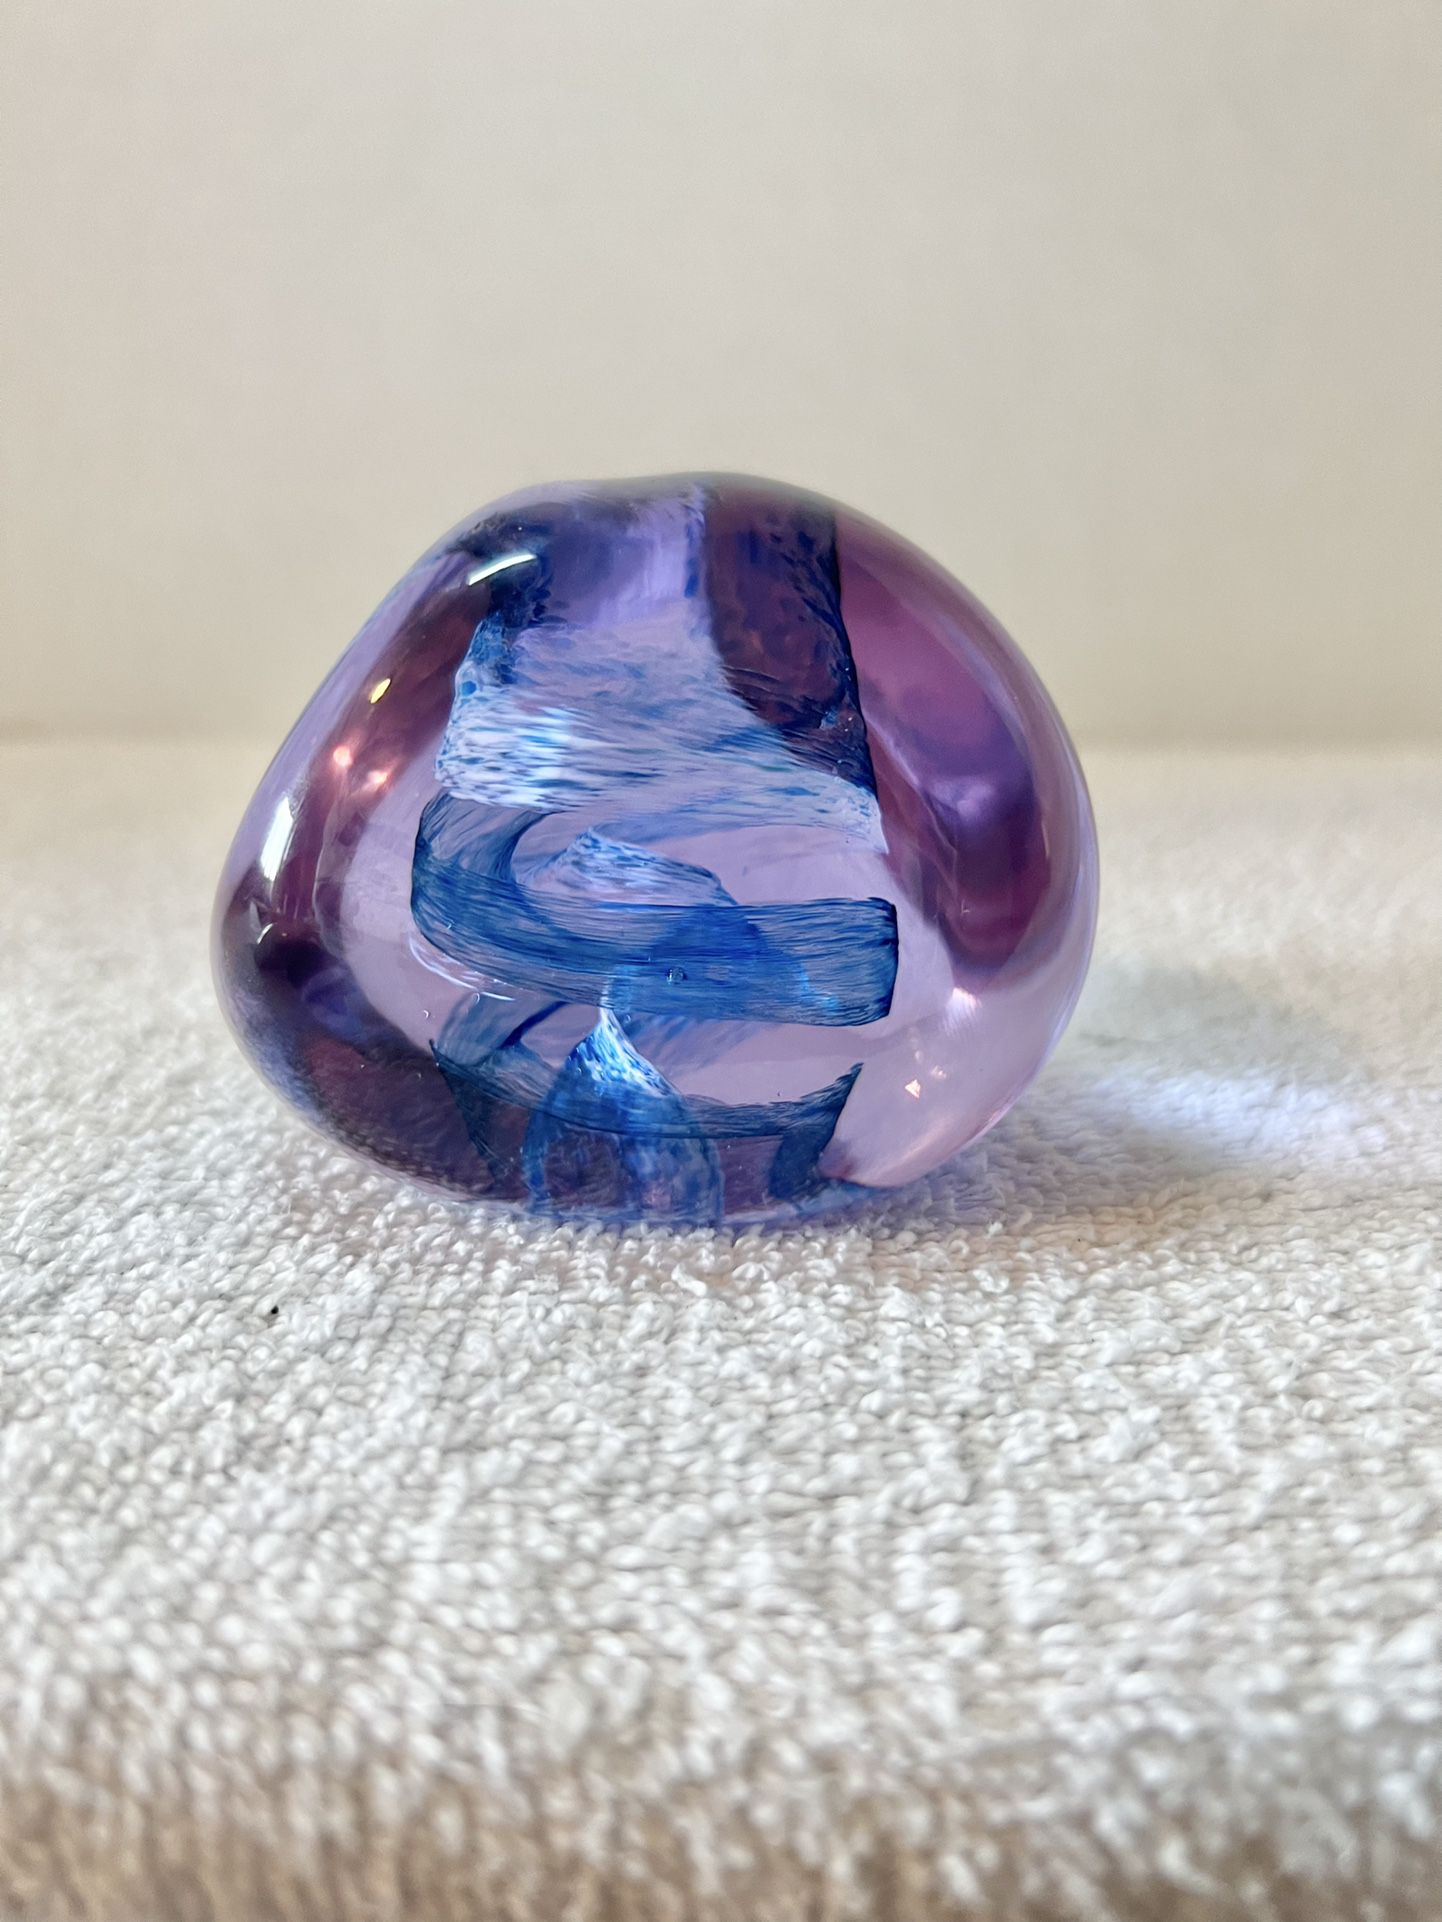 Caithness Scotland “ Pebble” Art Glass Abstract Paperweight/Acid Etched And Hand Numbered 